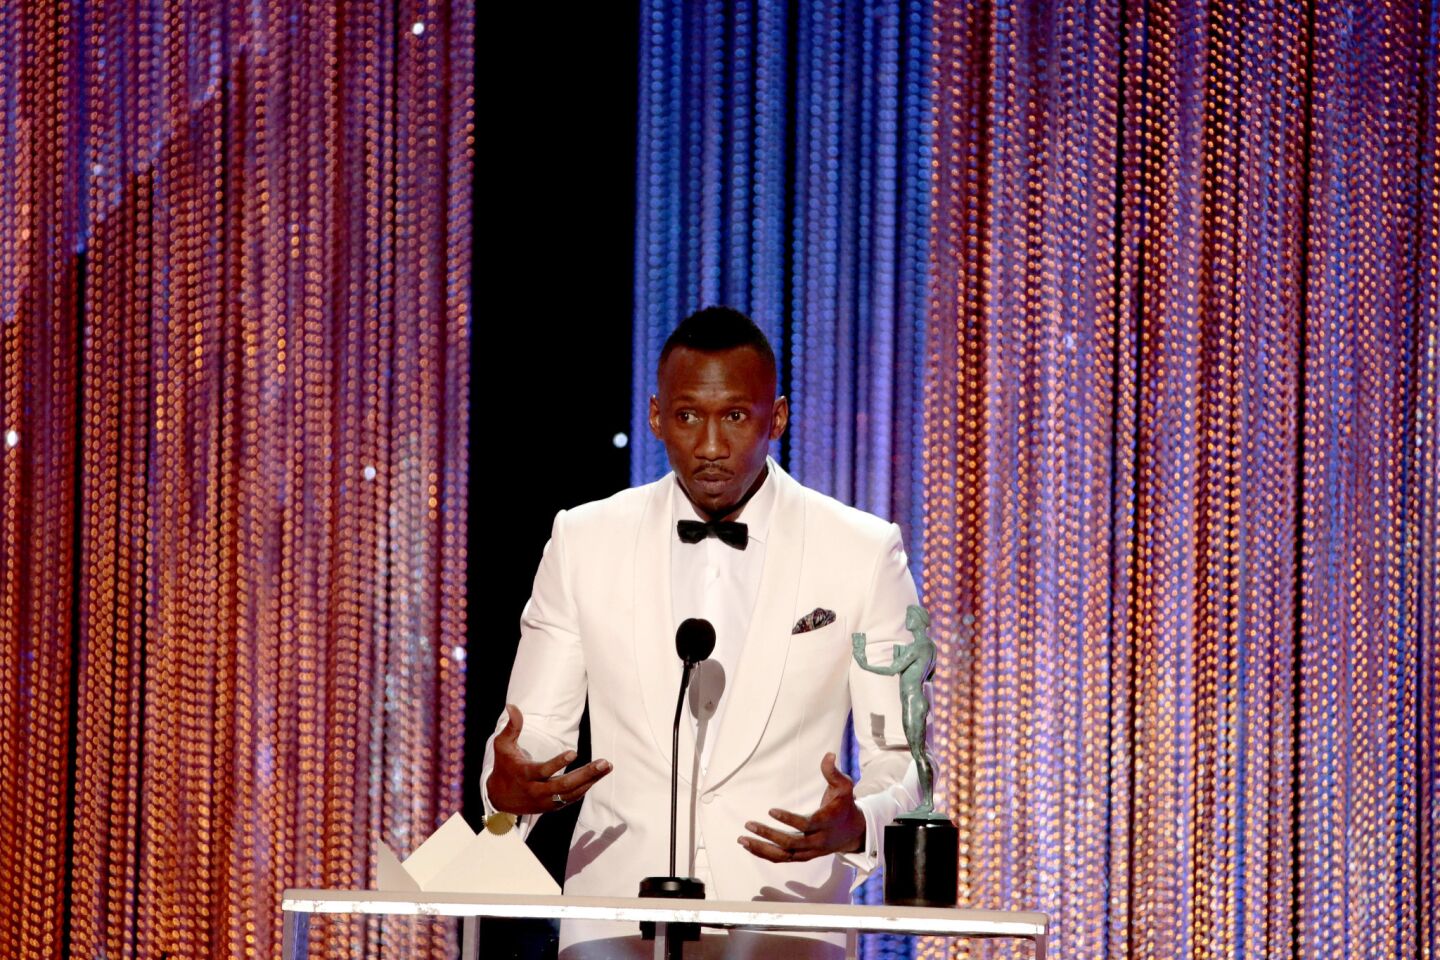 LOS ANGELES, CA - January 29, 2017â€”Mahershala Ali won for Male Actor in a Supporting Role for MOONLIGHT during the show at the 23rd Annual Screen Actors Guild Awards at the Shrine Auditorium in Los Angeles, CA on Sunday, January 29, 2017. (Robert Gauthier / Los Angeles Times)